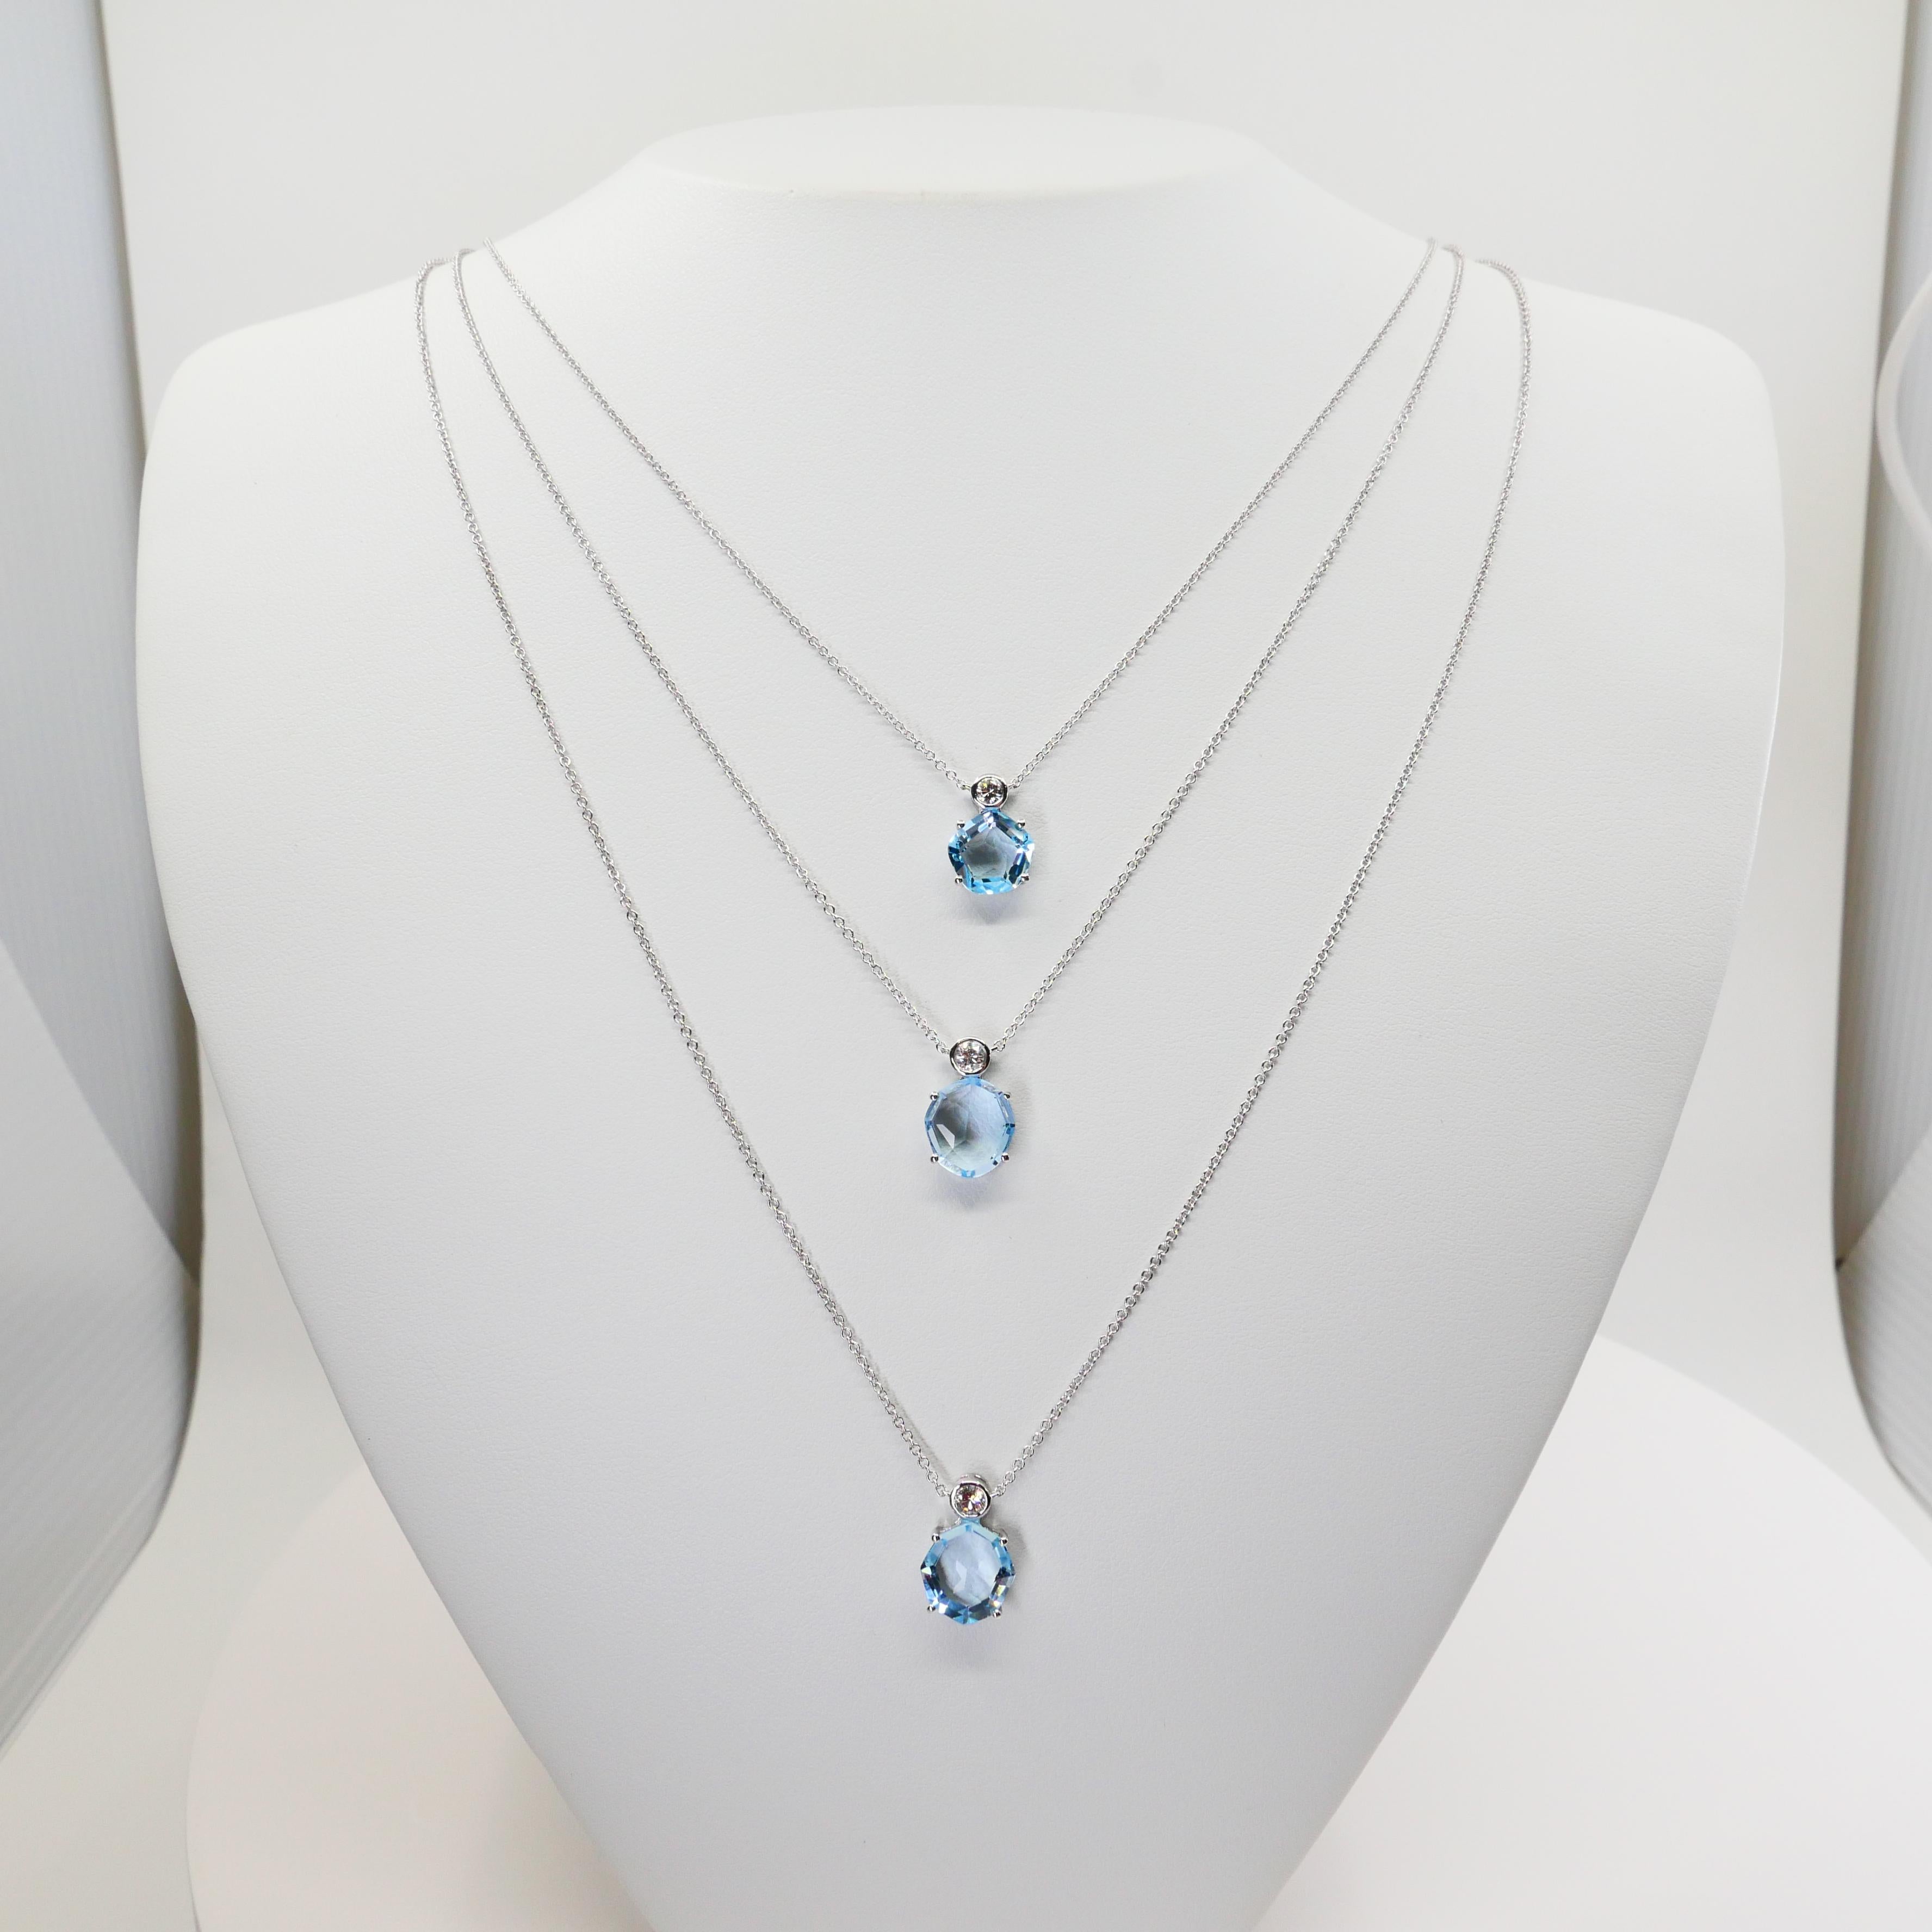 Check out the HD video! Here is a super nice powder blue Topaz and diamond layered necklace. It is set in 18k white gold. The 3 separate necklace can be worn as shown (layered) or individually. Each of the 3 necklaces are slightly adjustable in